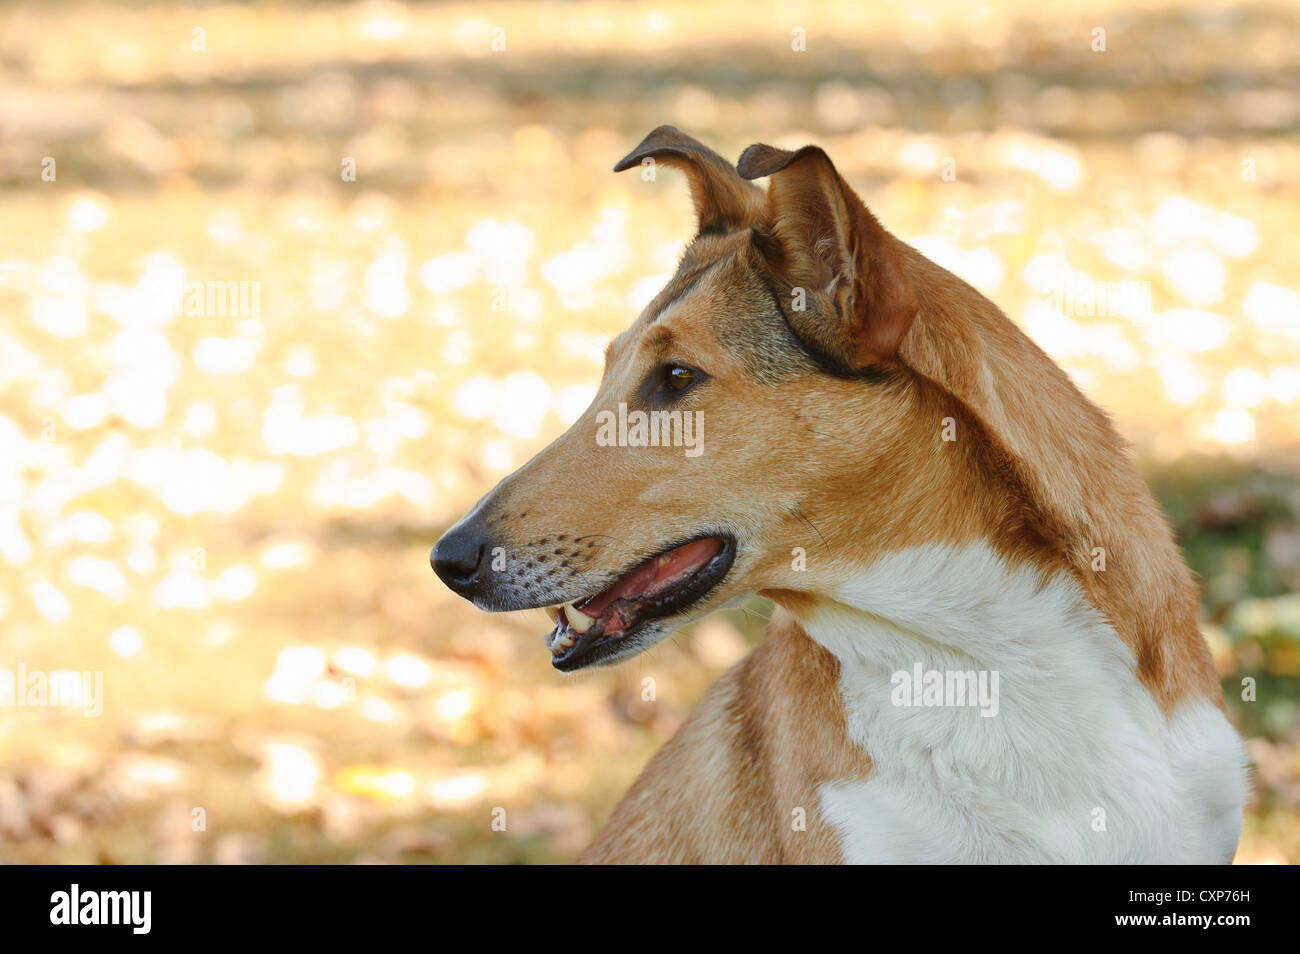 Profile of a Smooth Collie dog in autumn scenery Stock Photo